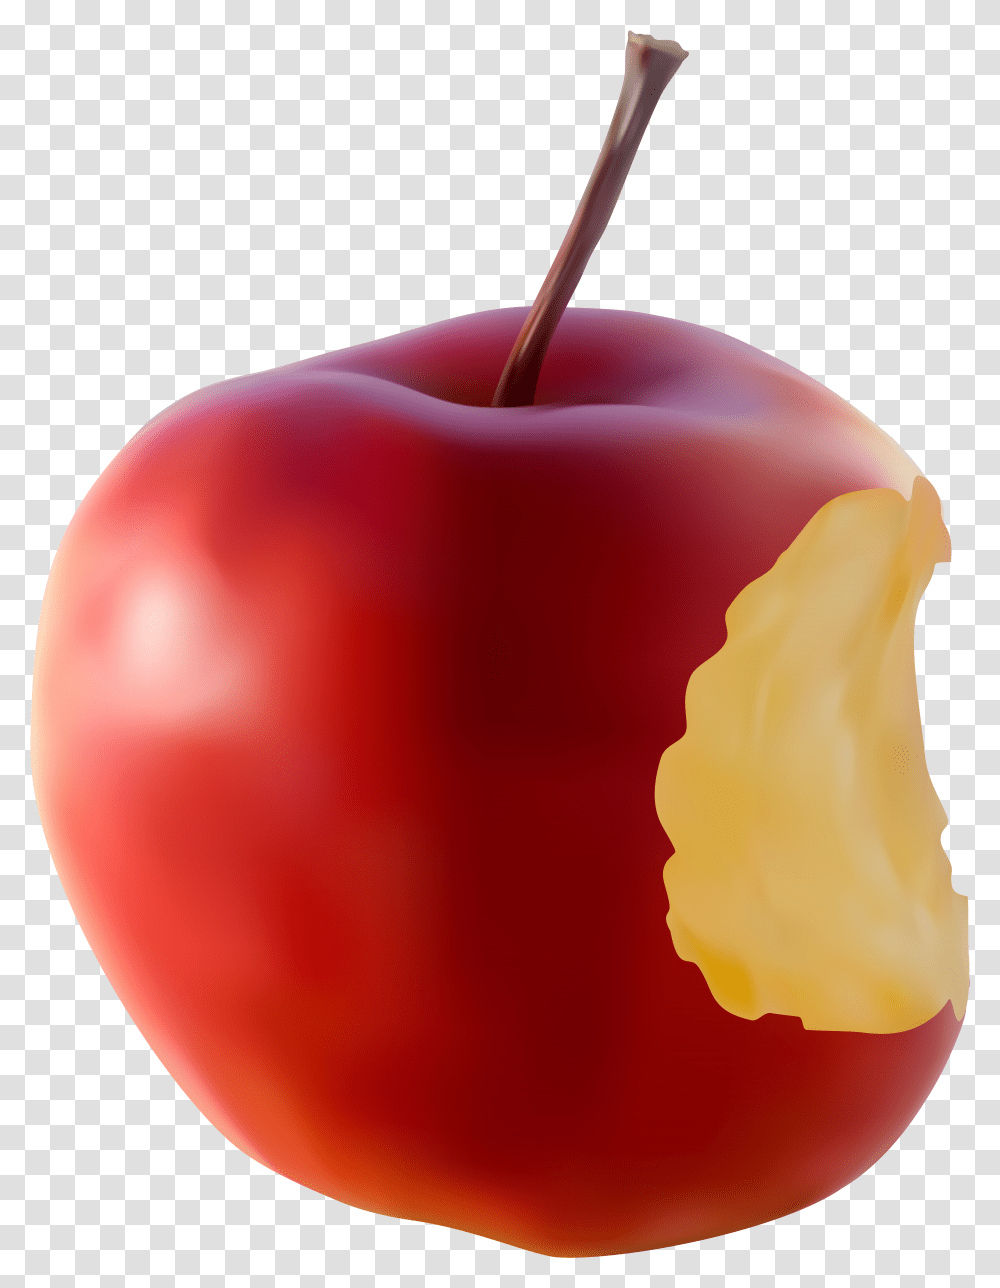 Free Apple Cliparts Apples Background Transparent Png